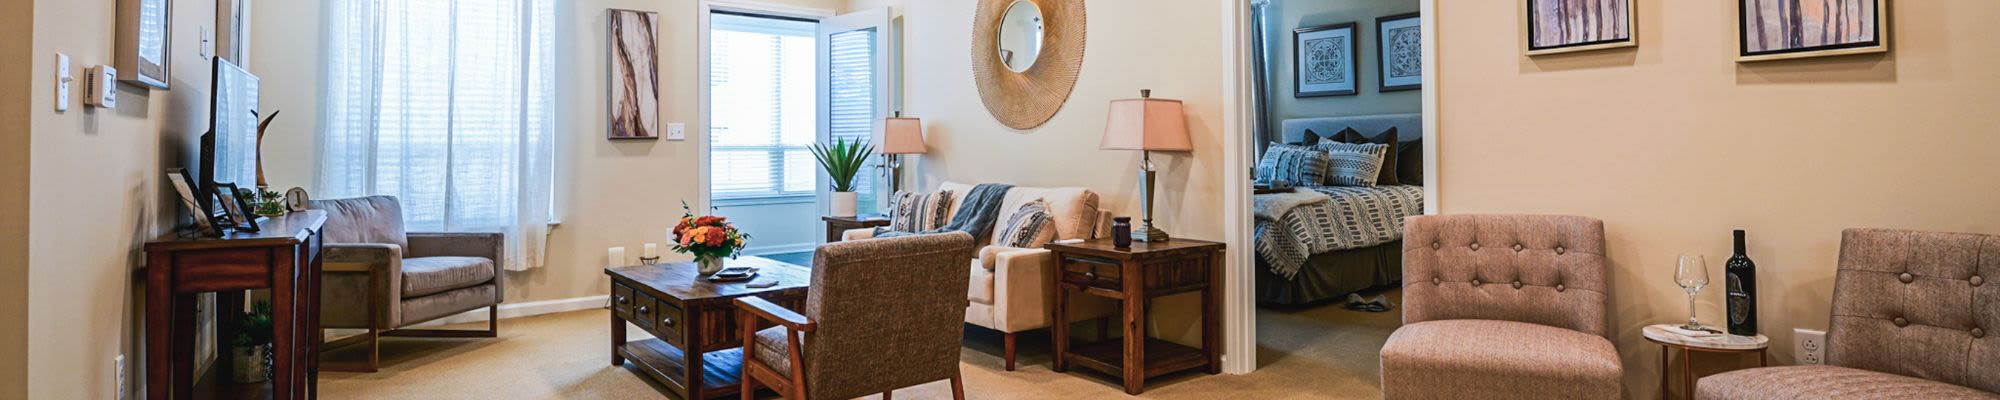 Floor Plans at Harmony at Five Forks in Simpsonville, South Carolina